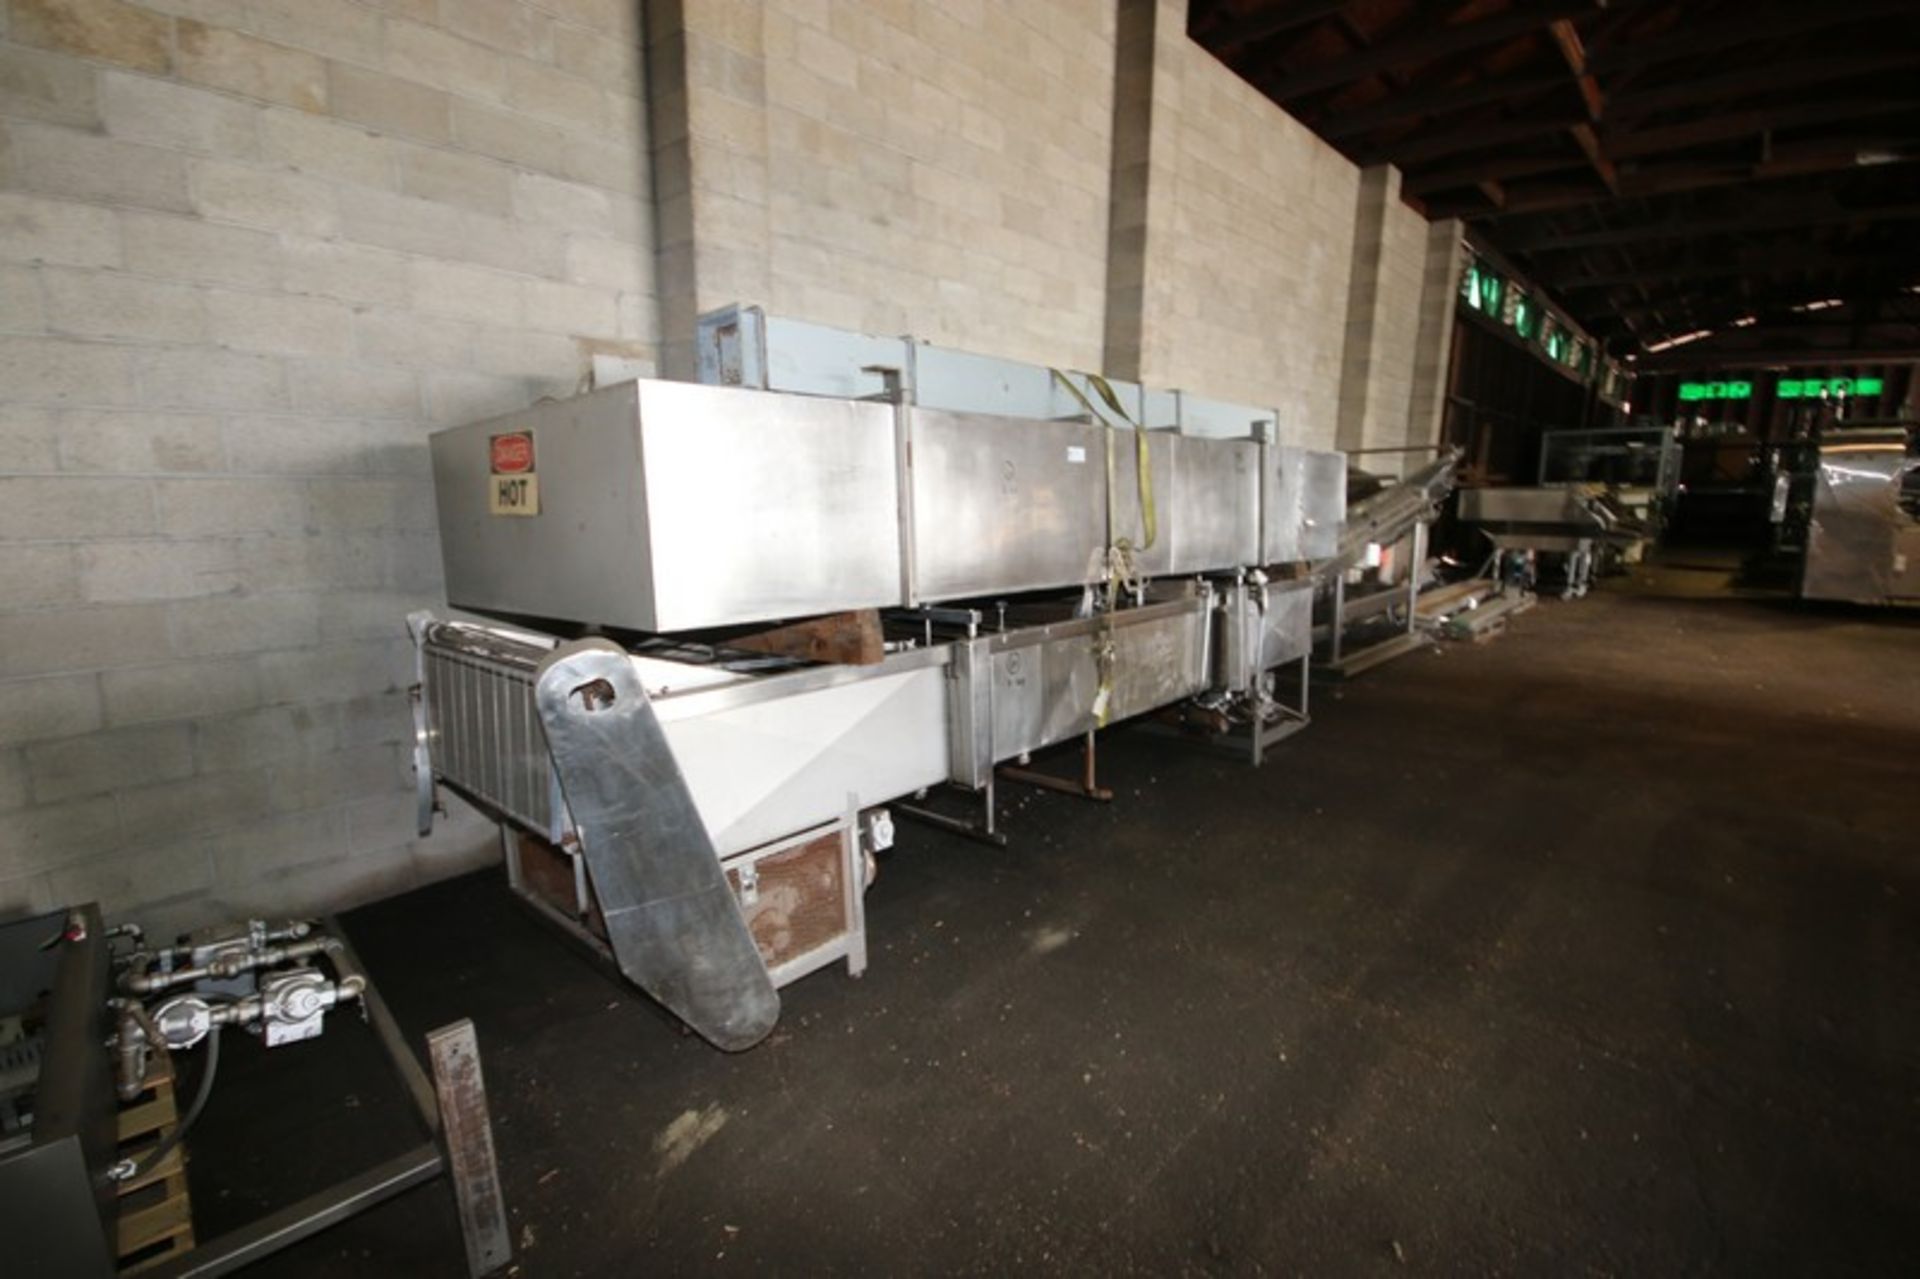 Higgs S/S Conveyor Bakery Fryer,Natural Gas Heated, 14' L x 54"W, Includes Exhaust Hood & Control